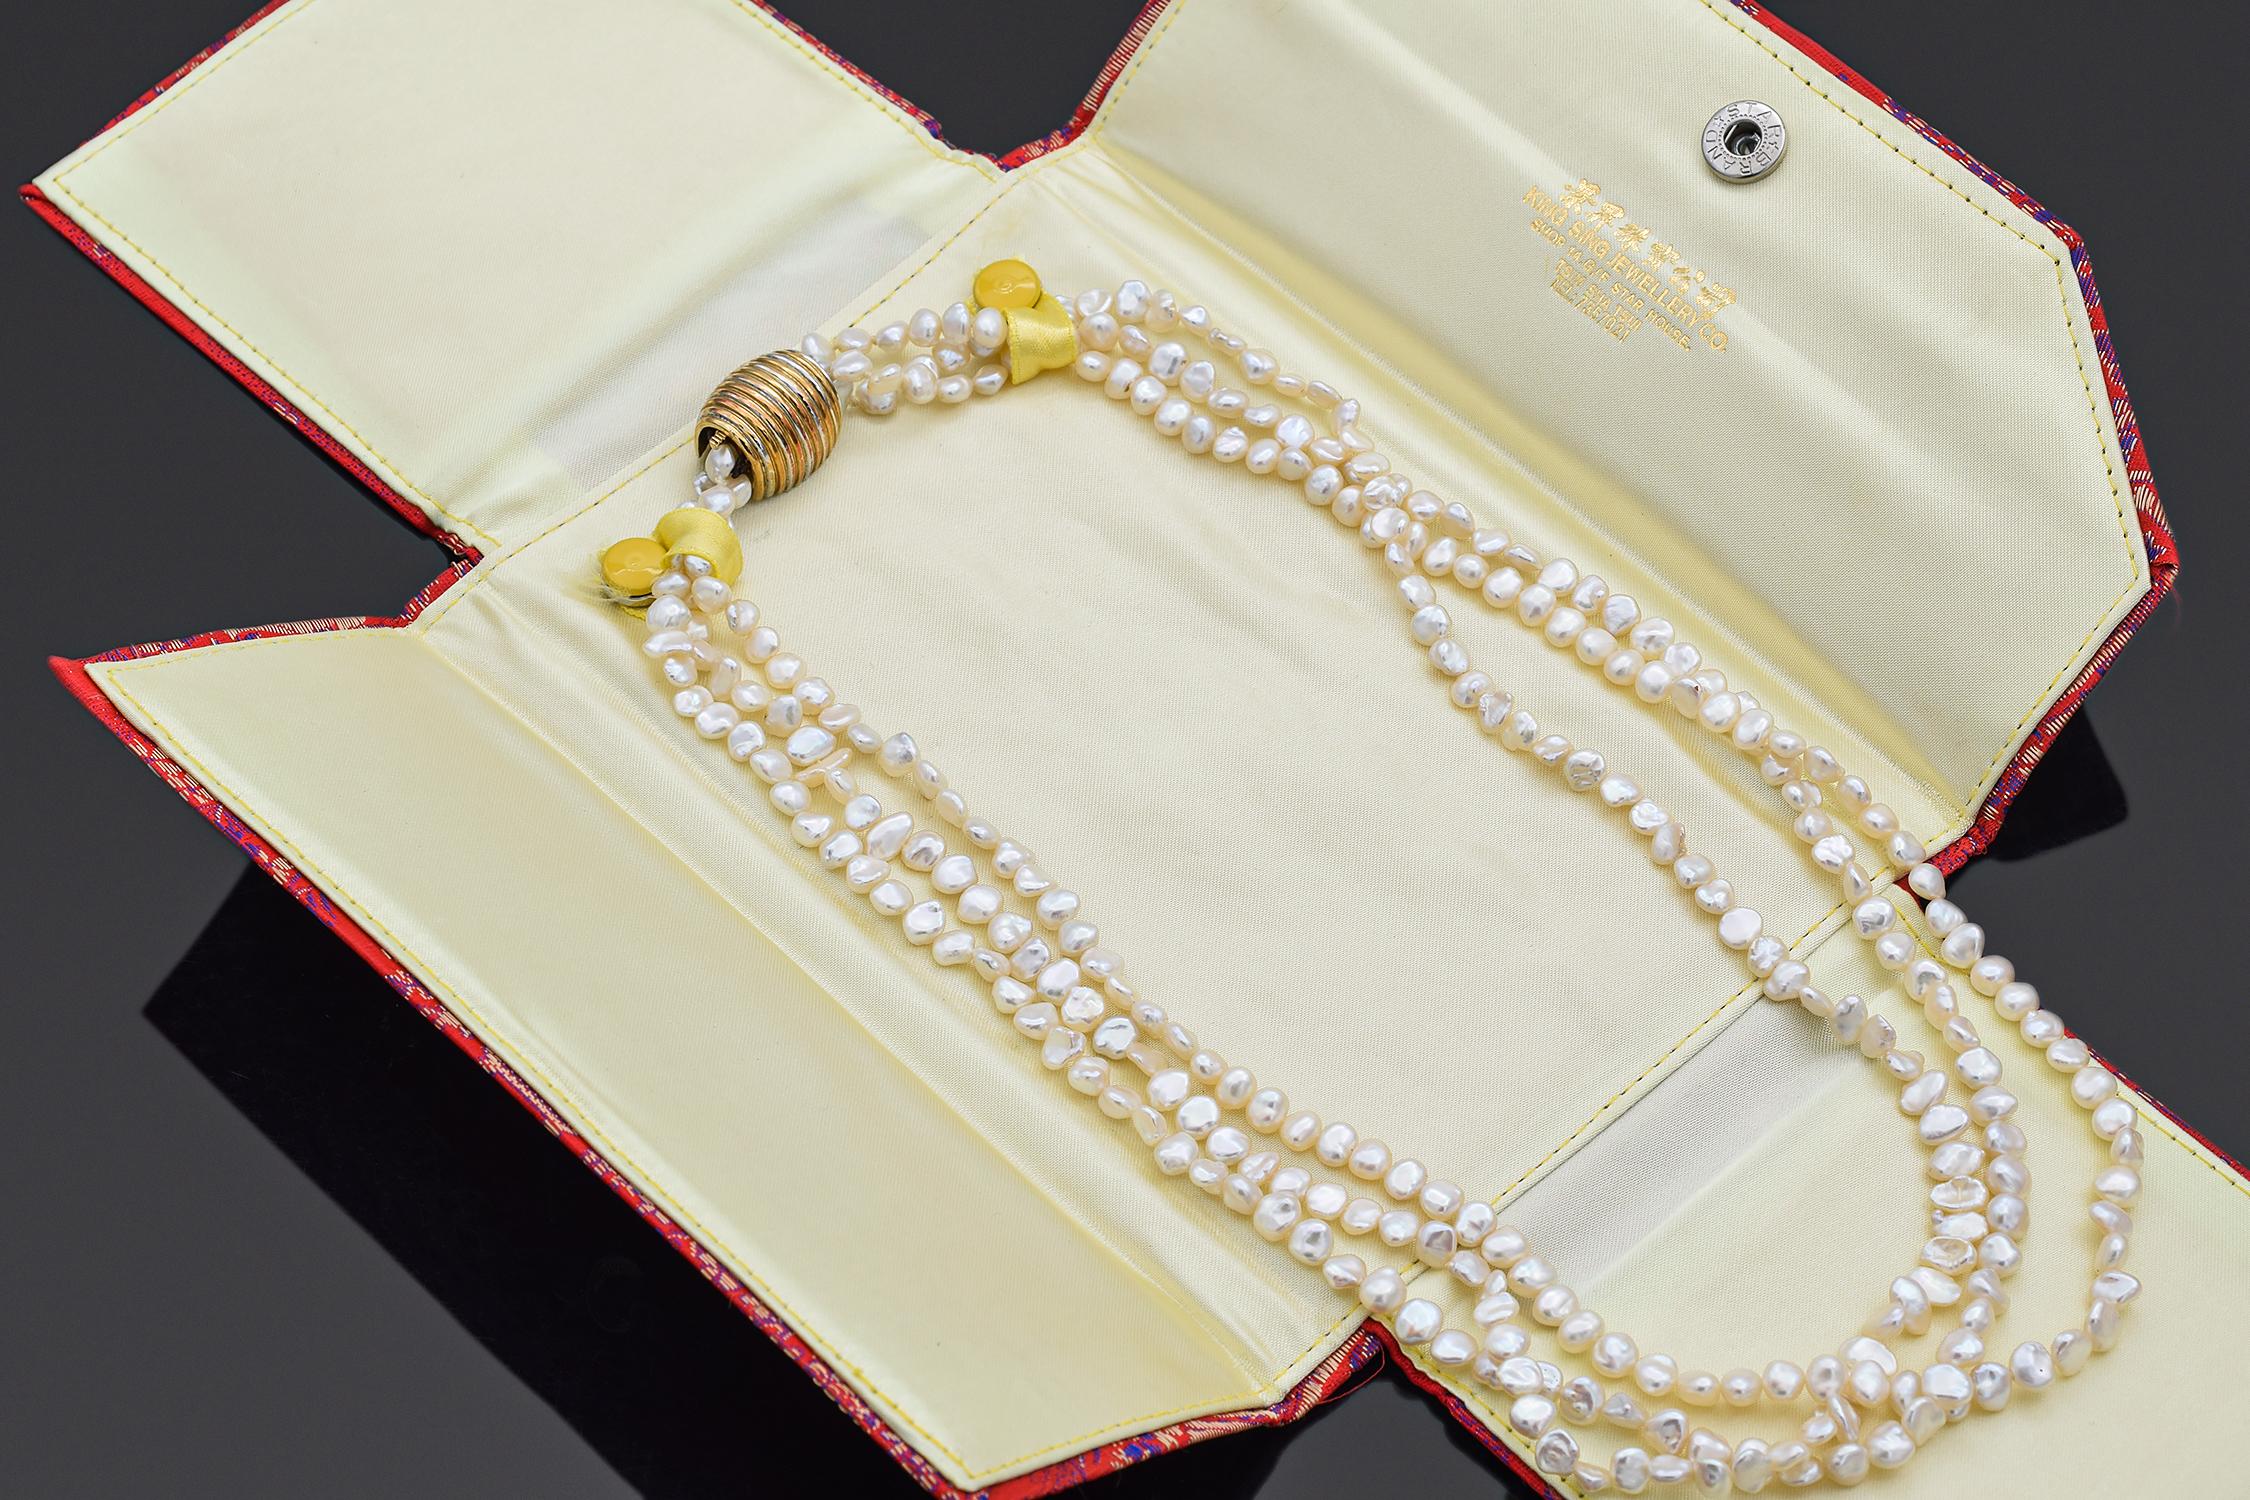 Weight: 58.8 Grams
Stone: Pearl (6-8 mm)
Length: 20 Inches
Hallmark: 14K 585

ITEM #:BR-1078-101823-11